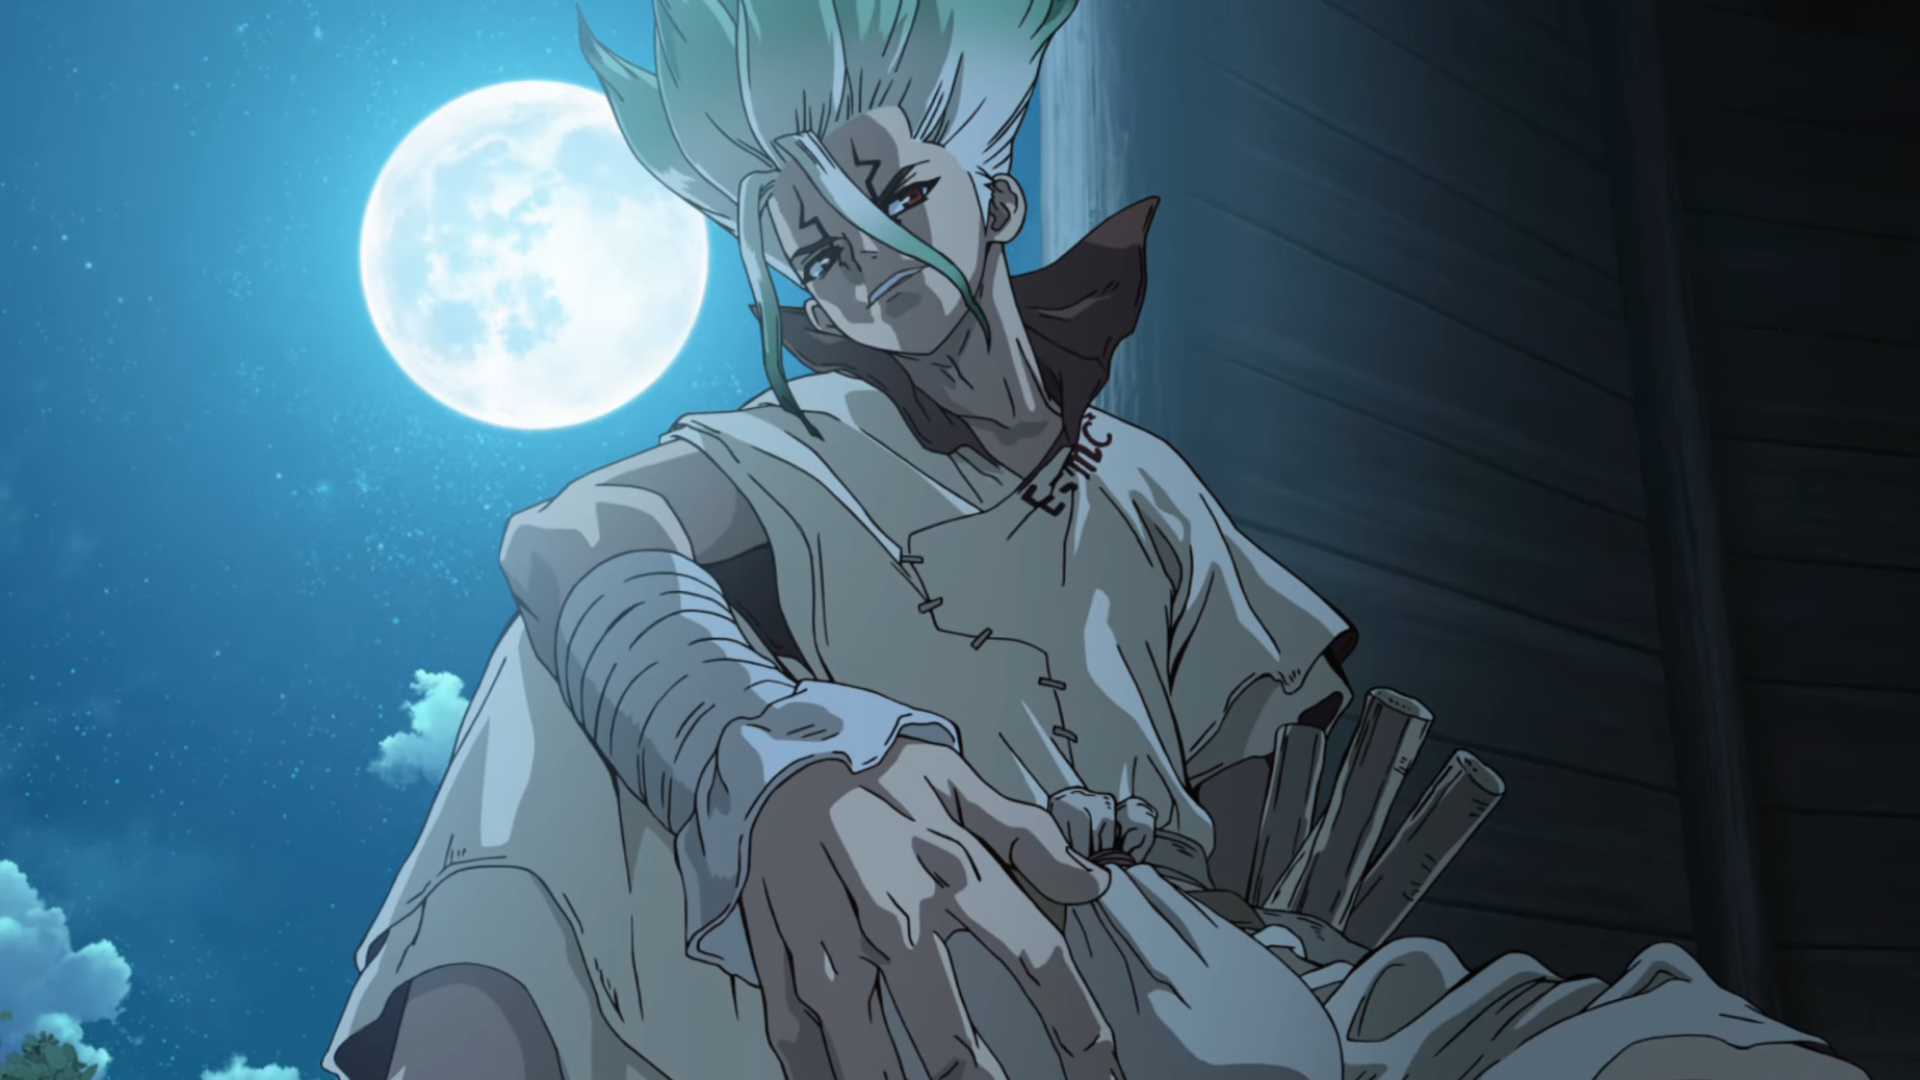 Dr. STONE Season 3 release date confirmed for Spring 2023, New